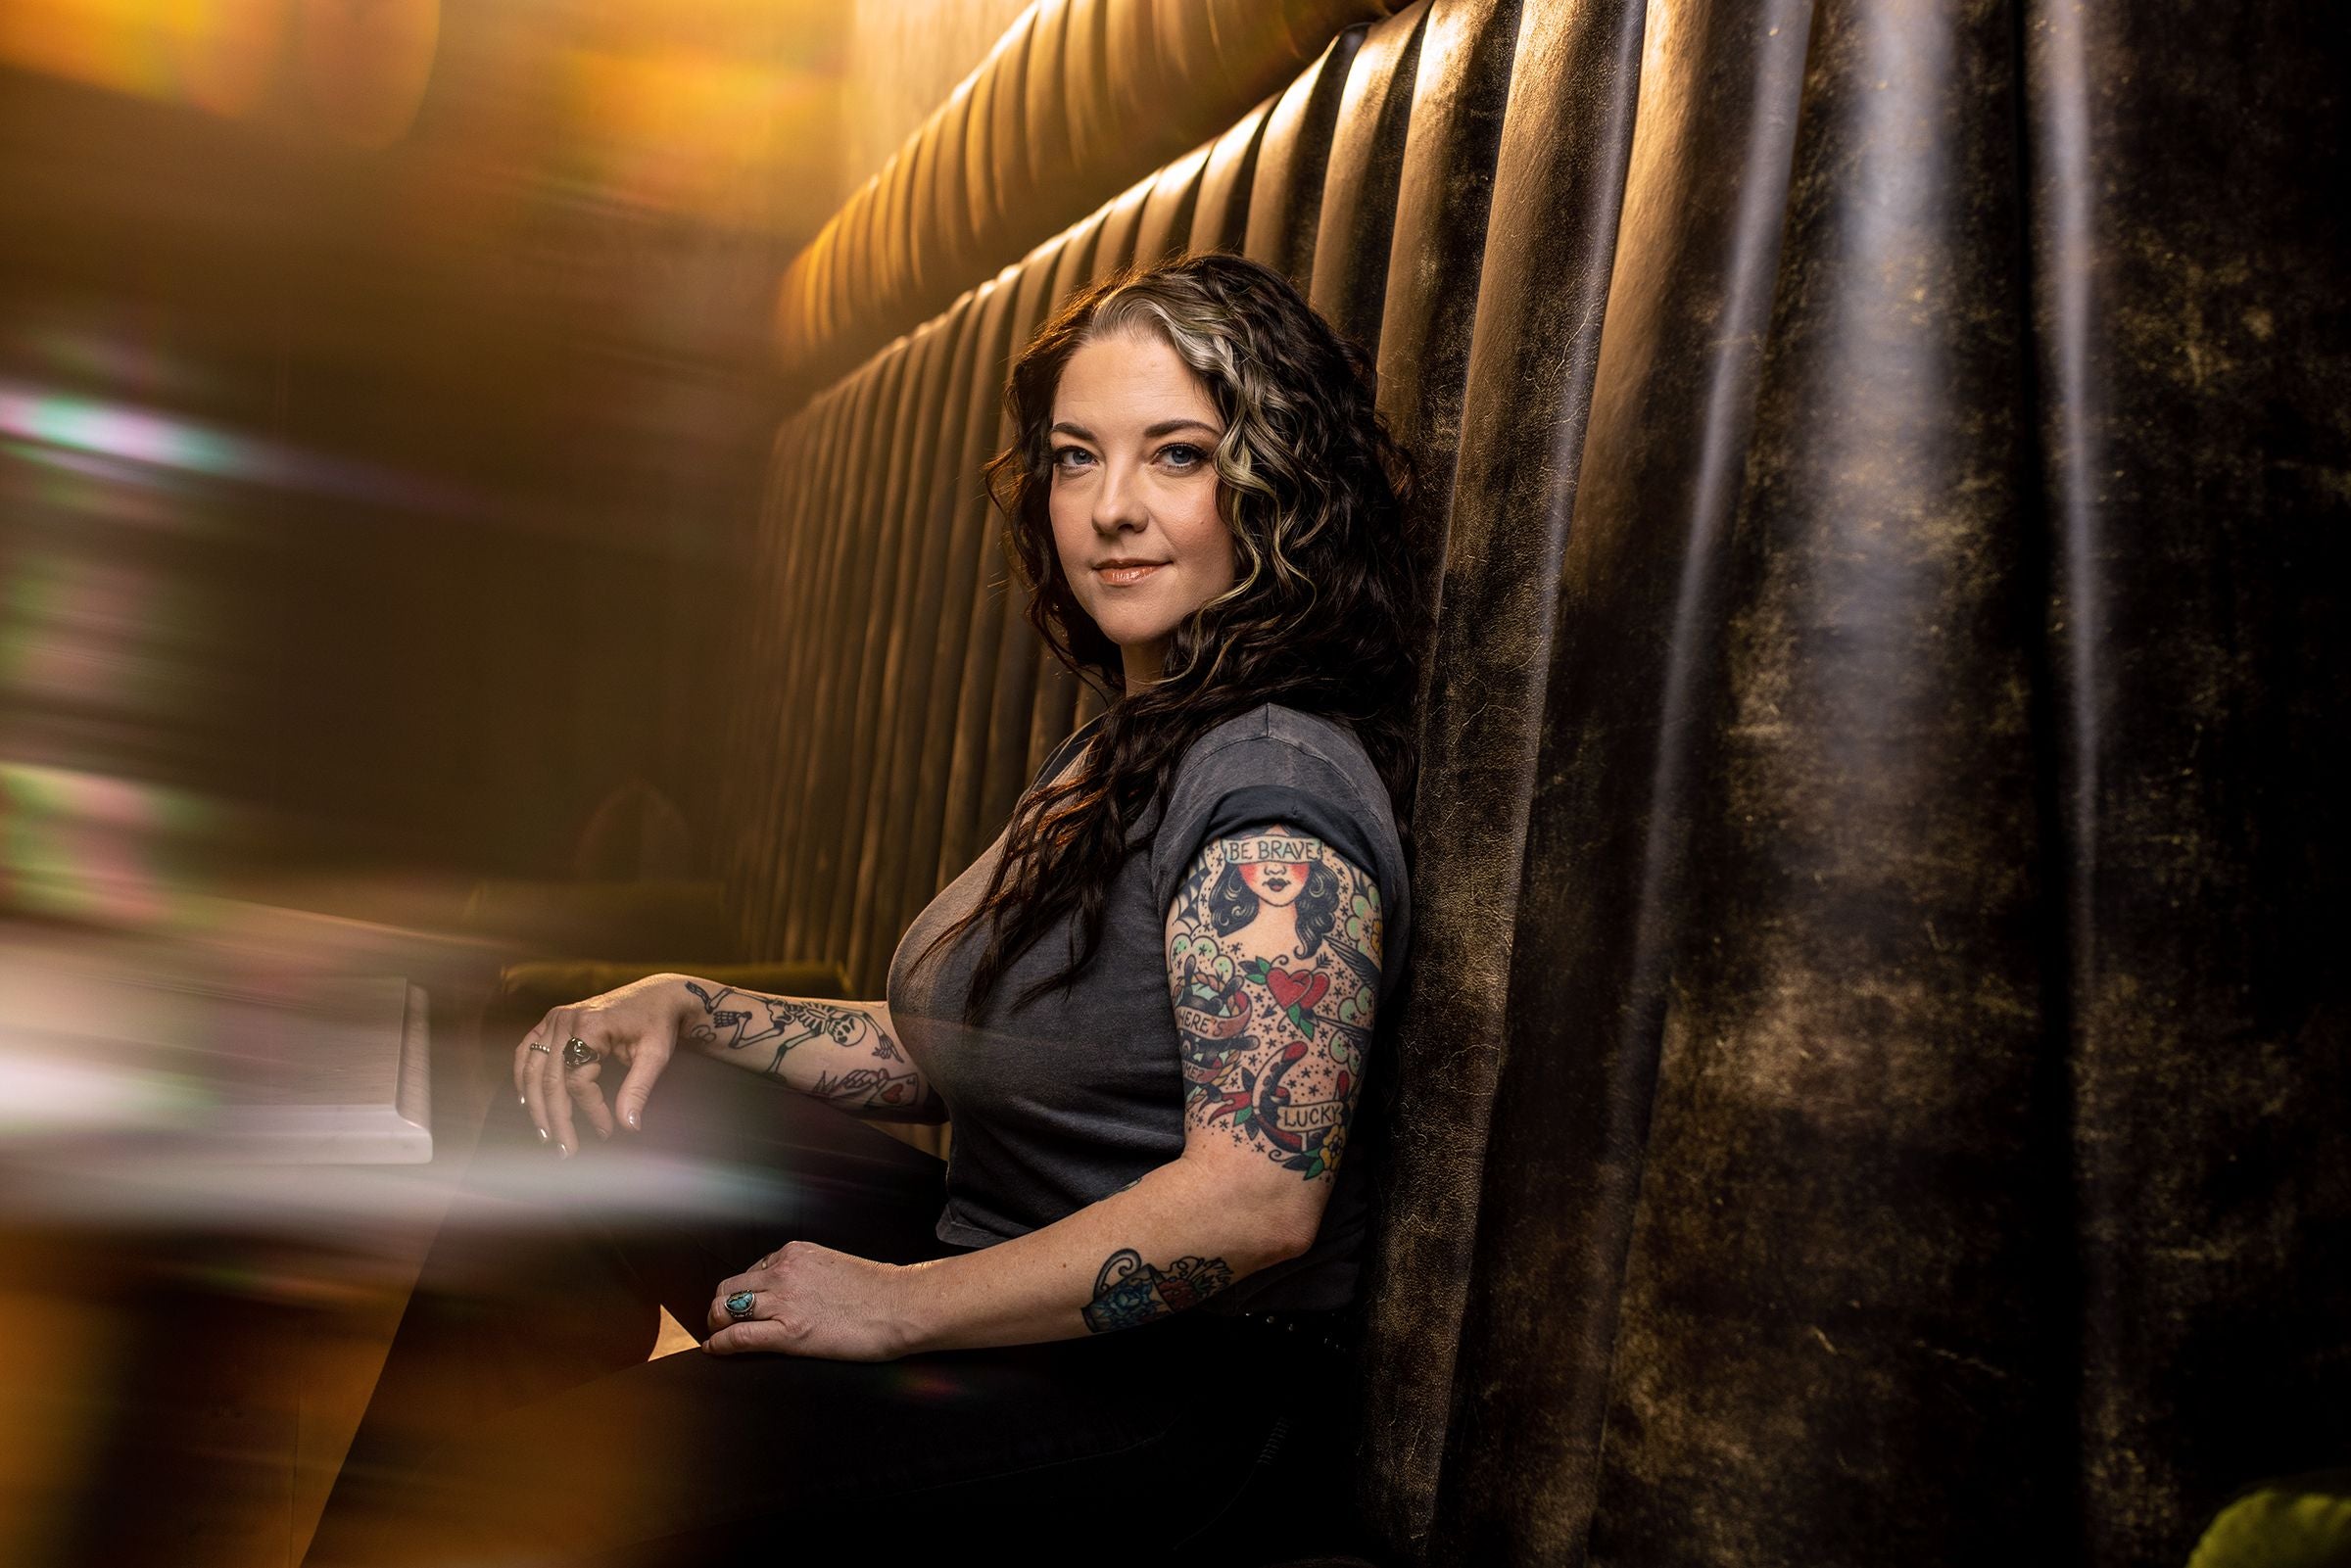 Ashley McBryde: The Devil I Know Tour at The Magnolia